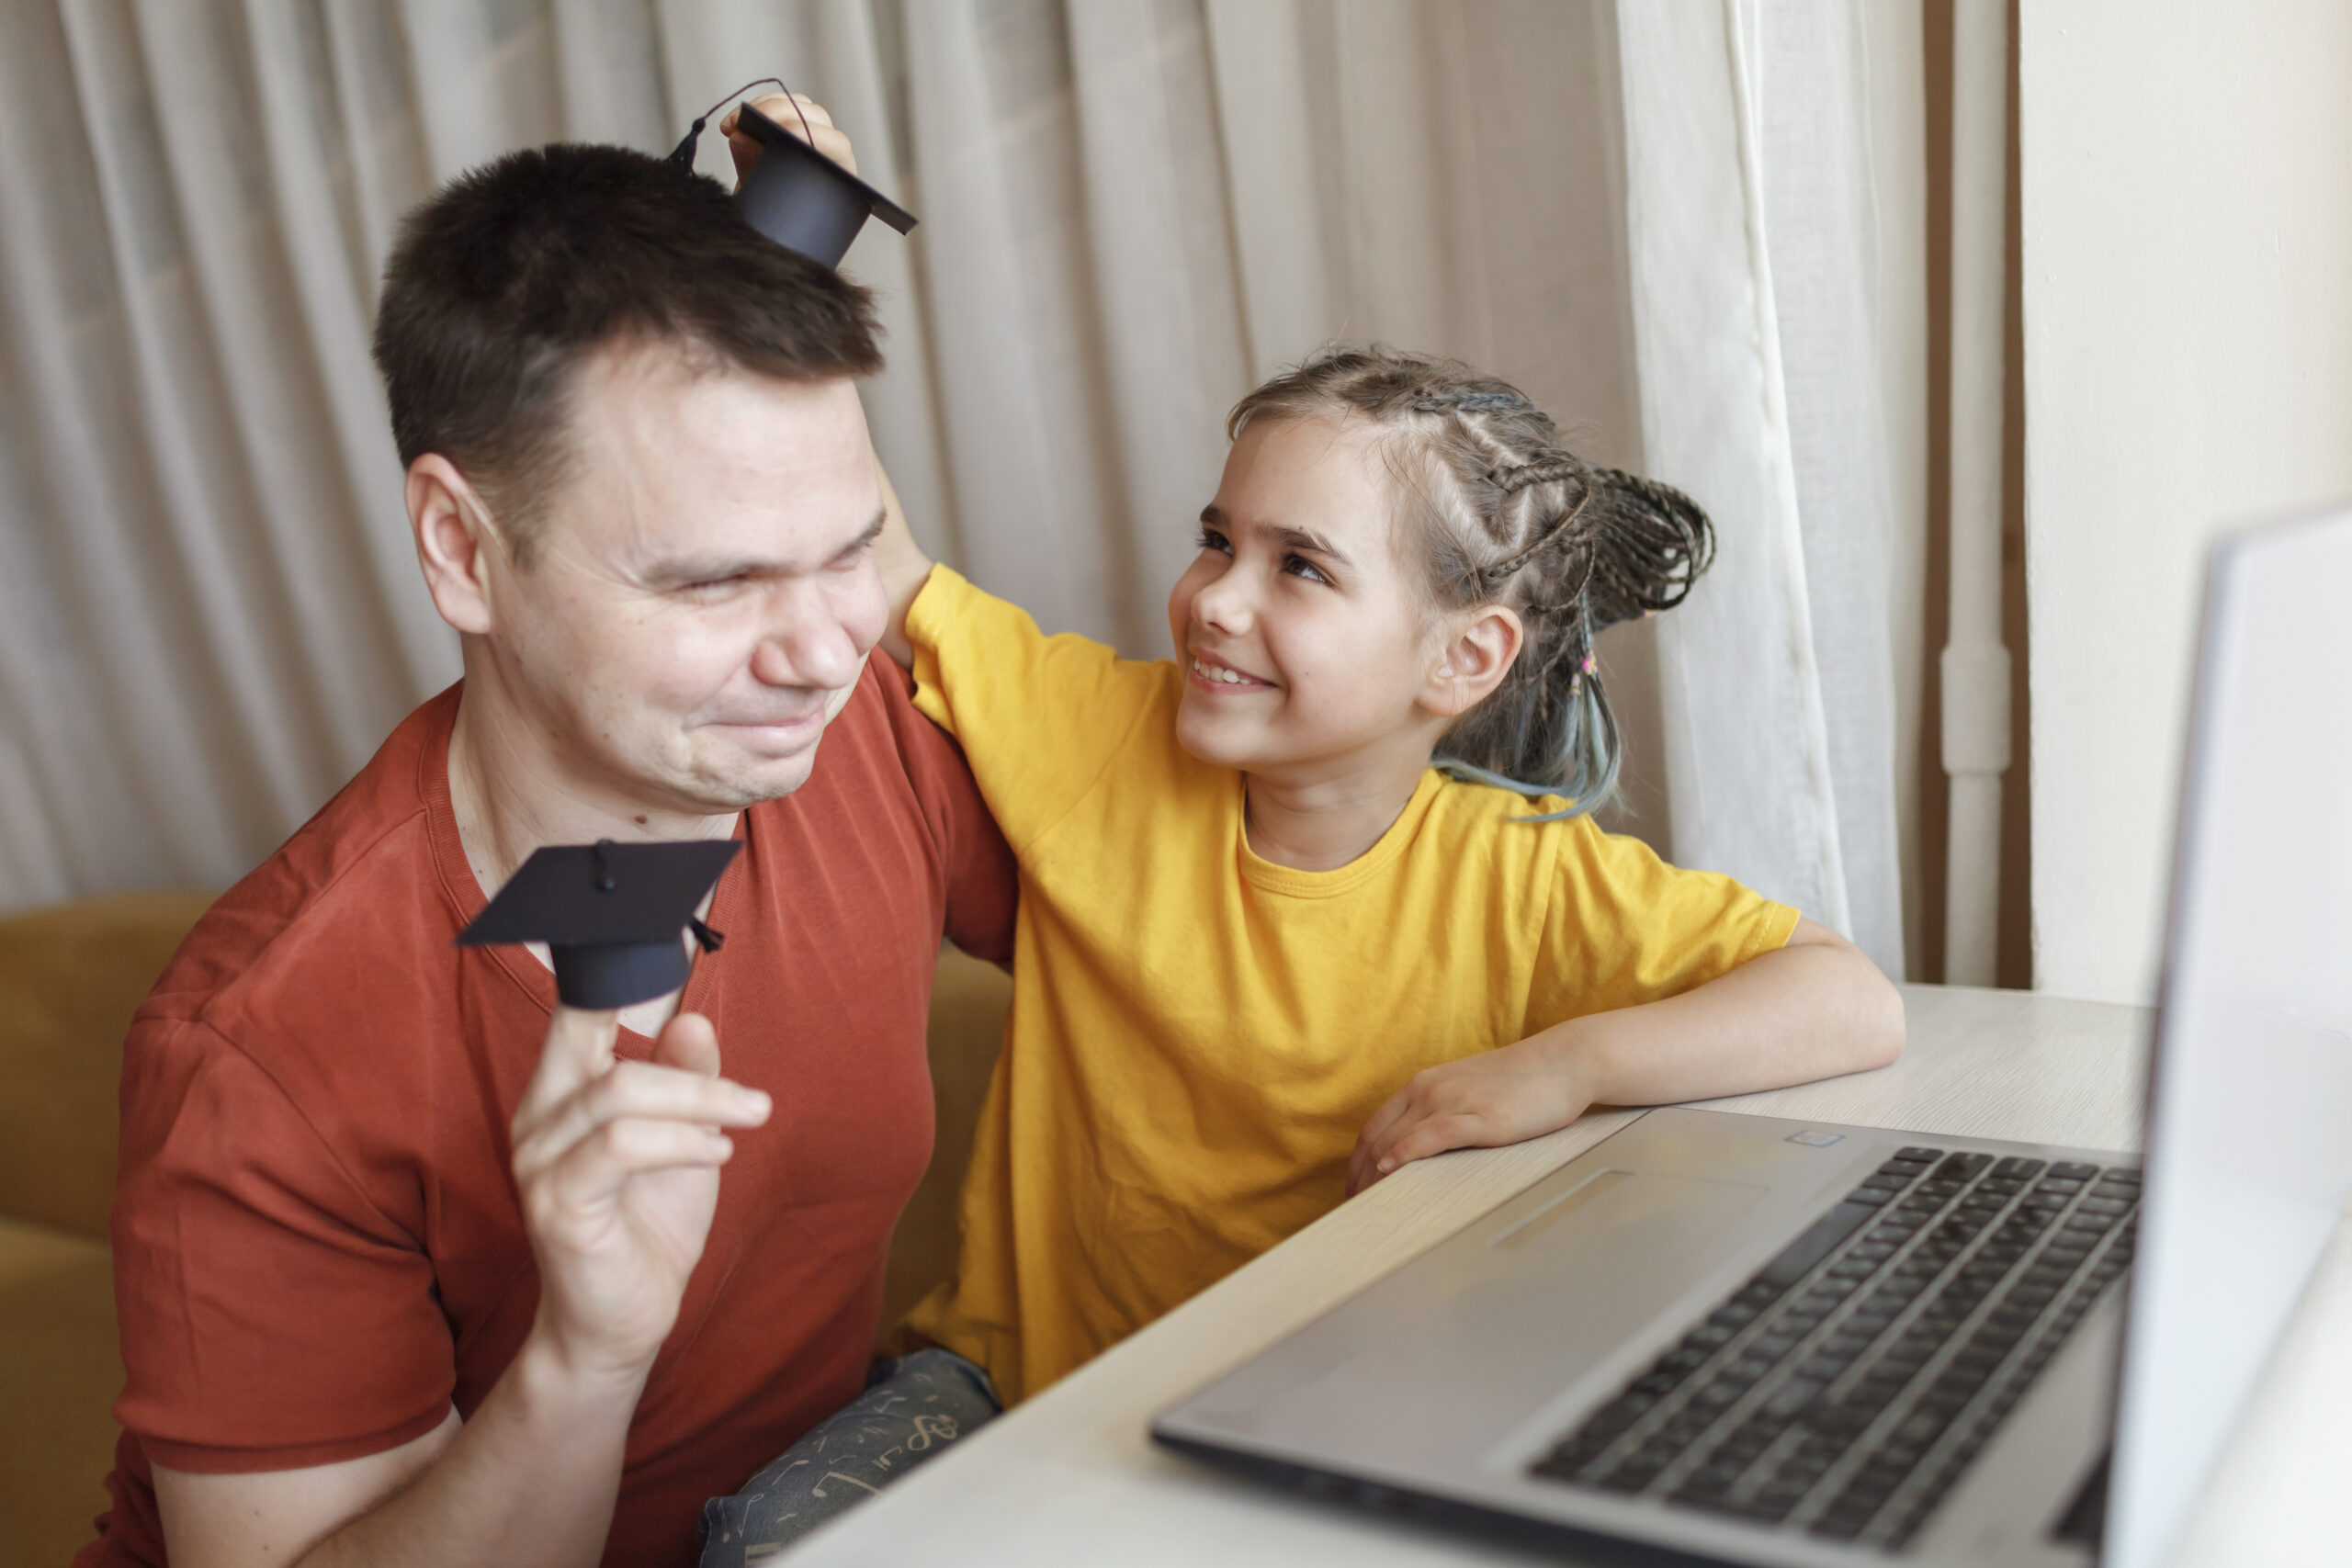 benefits of online education from a parent's perspective